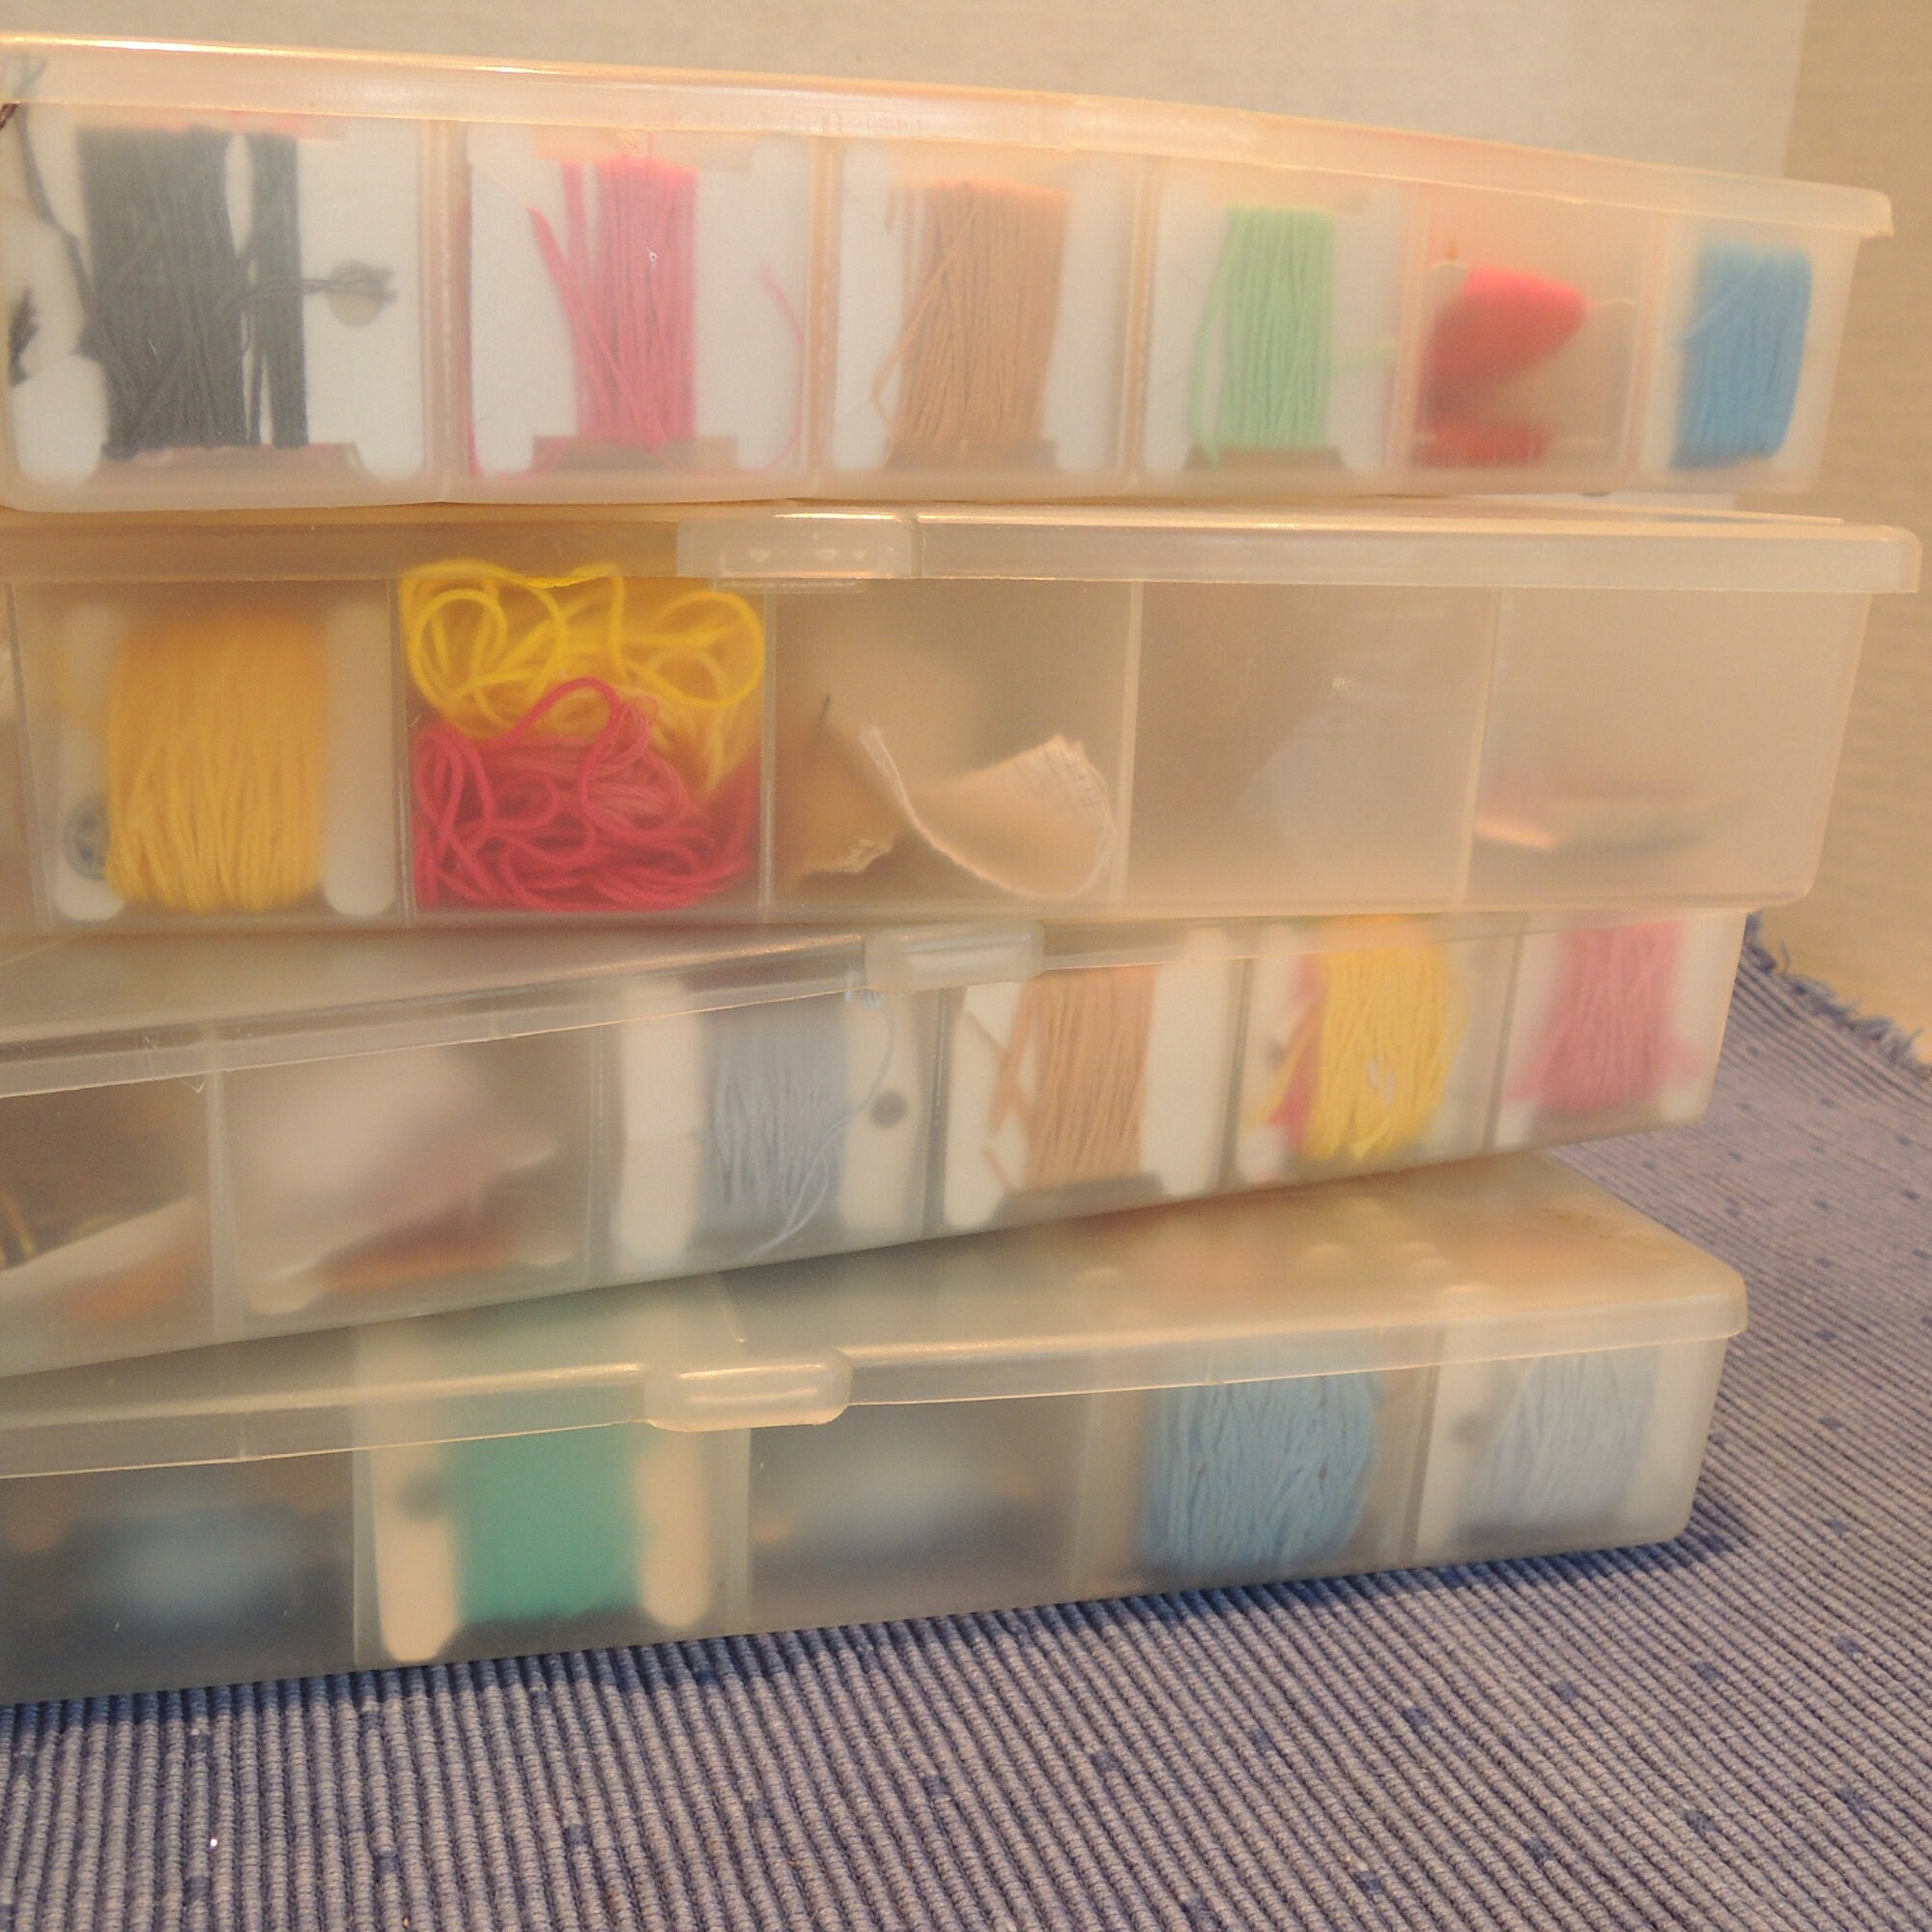 Darice Embroidery Floss Organizer with Numbered Floss + Accessories FT512